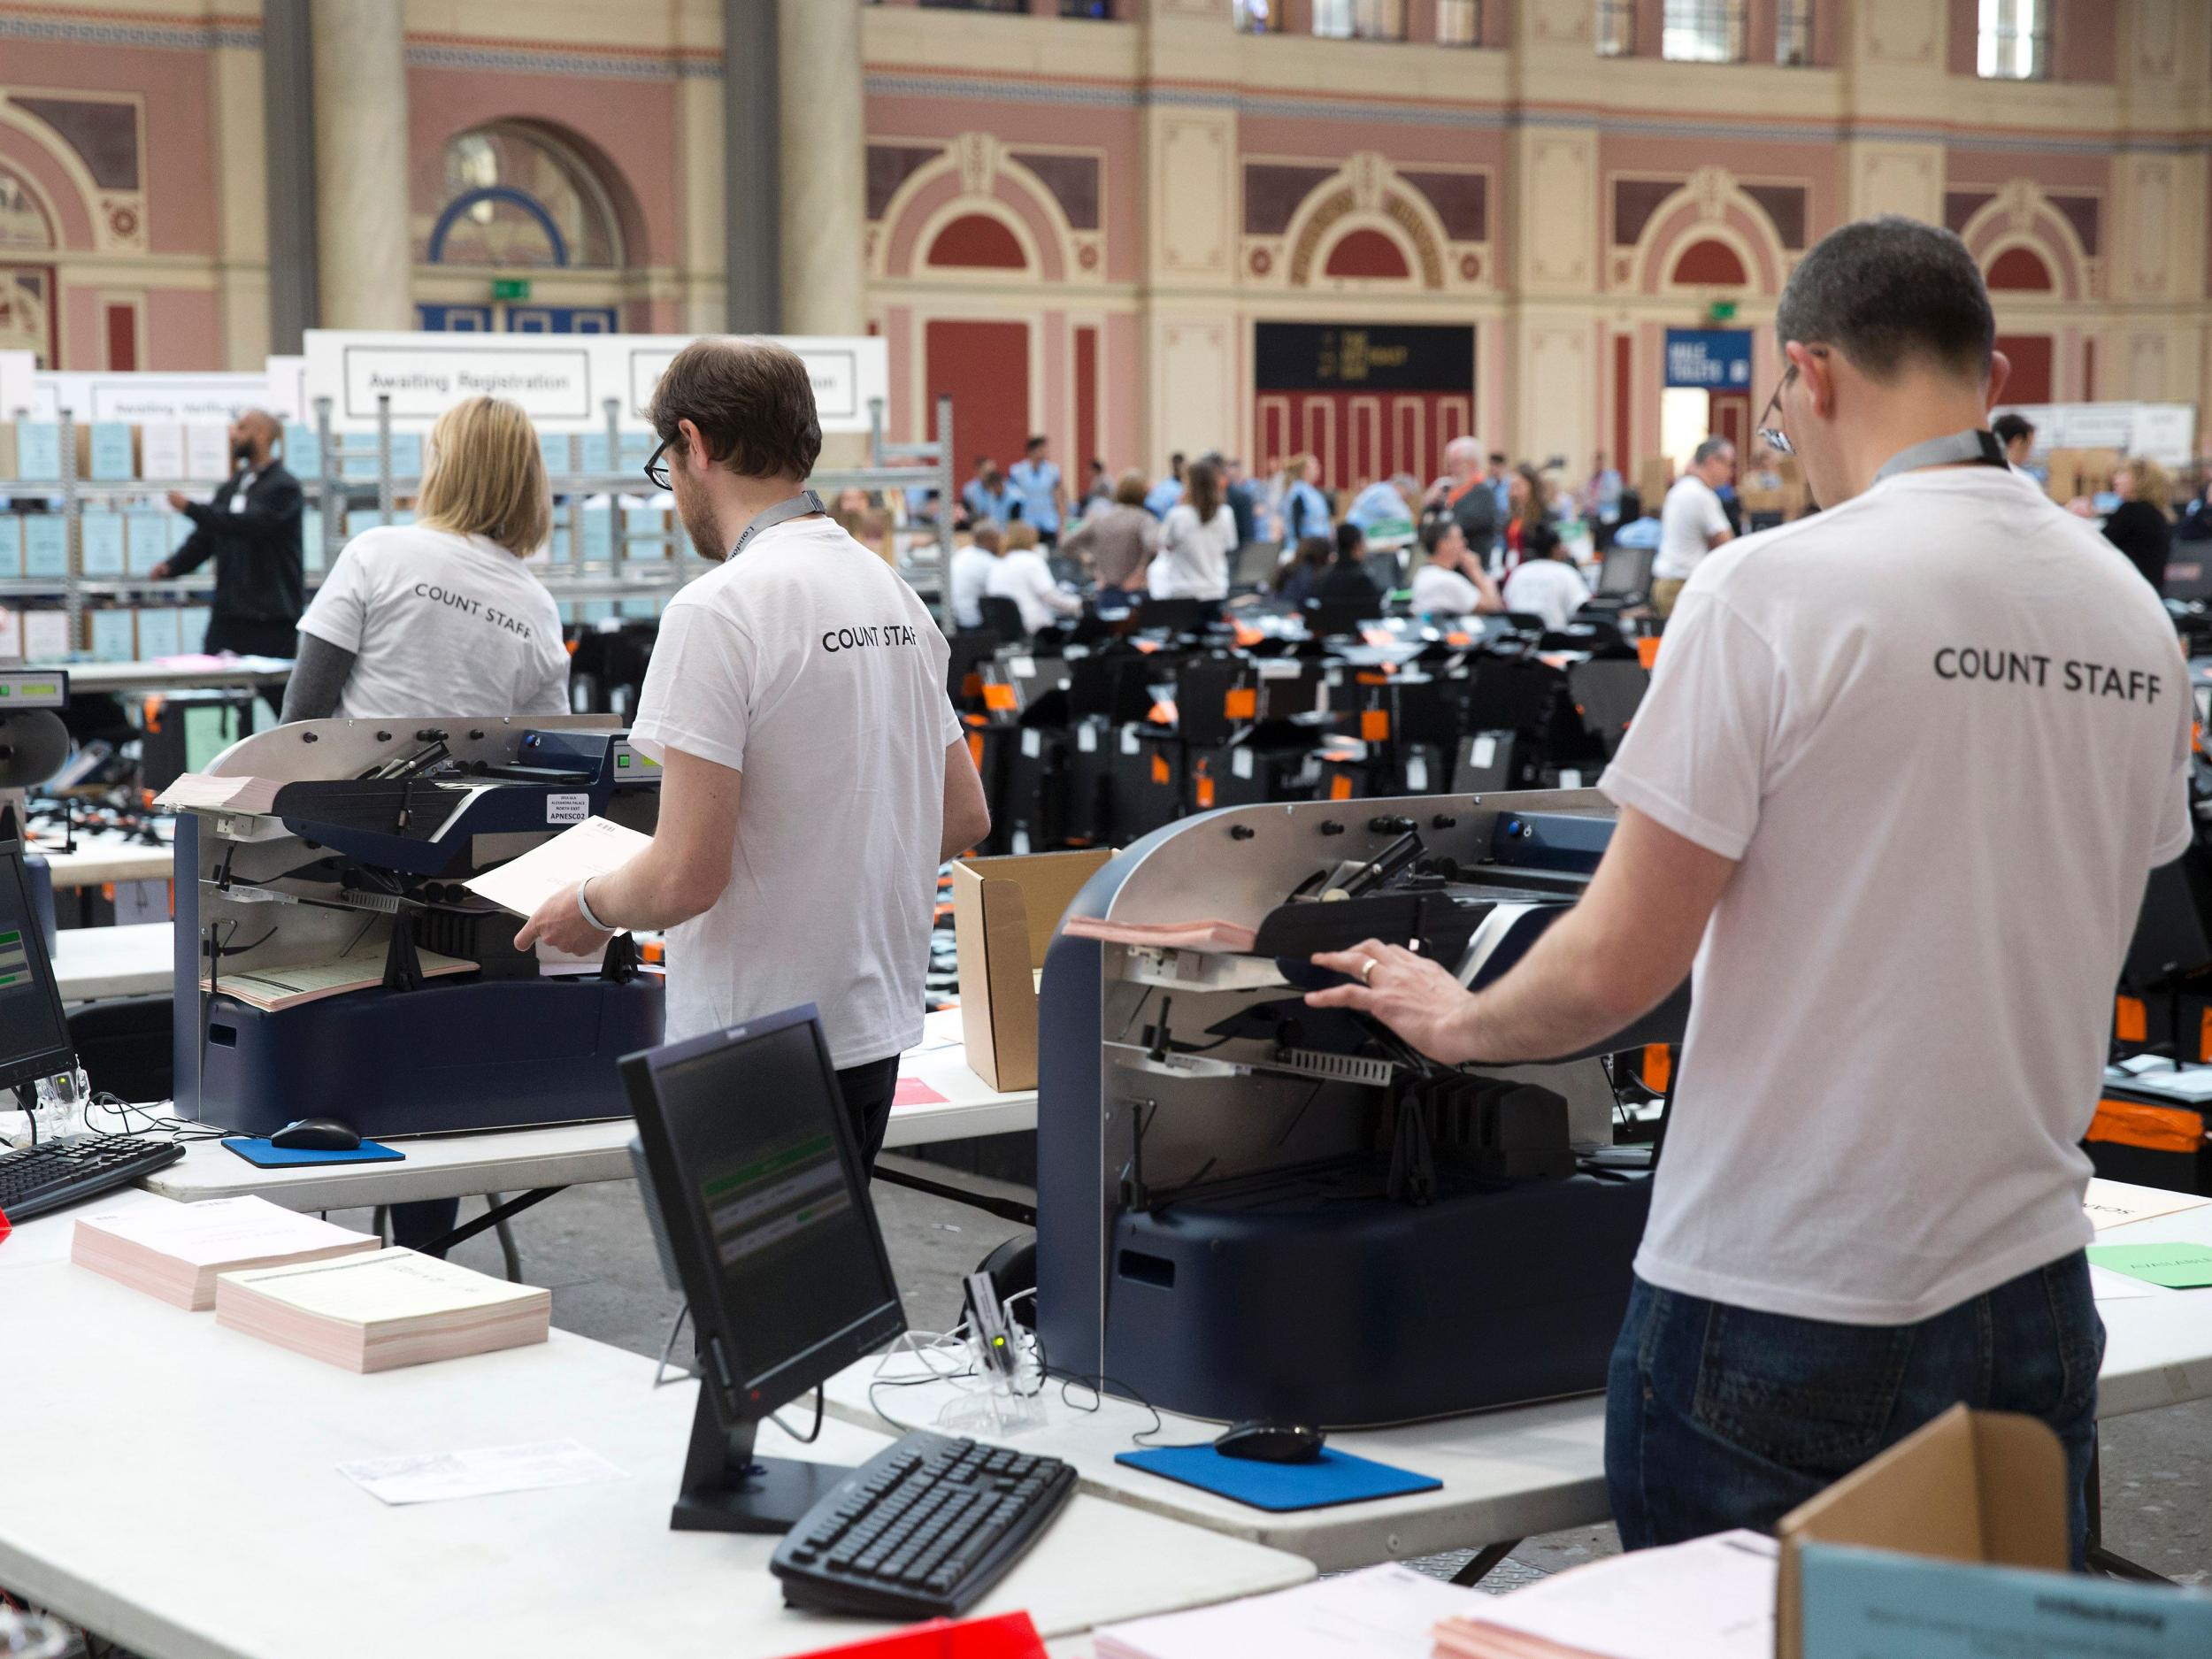 Members of the counting staff use electronic machines to count ballot papers at a count centre in north London on May 6, 2016